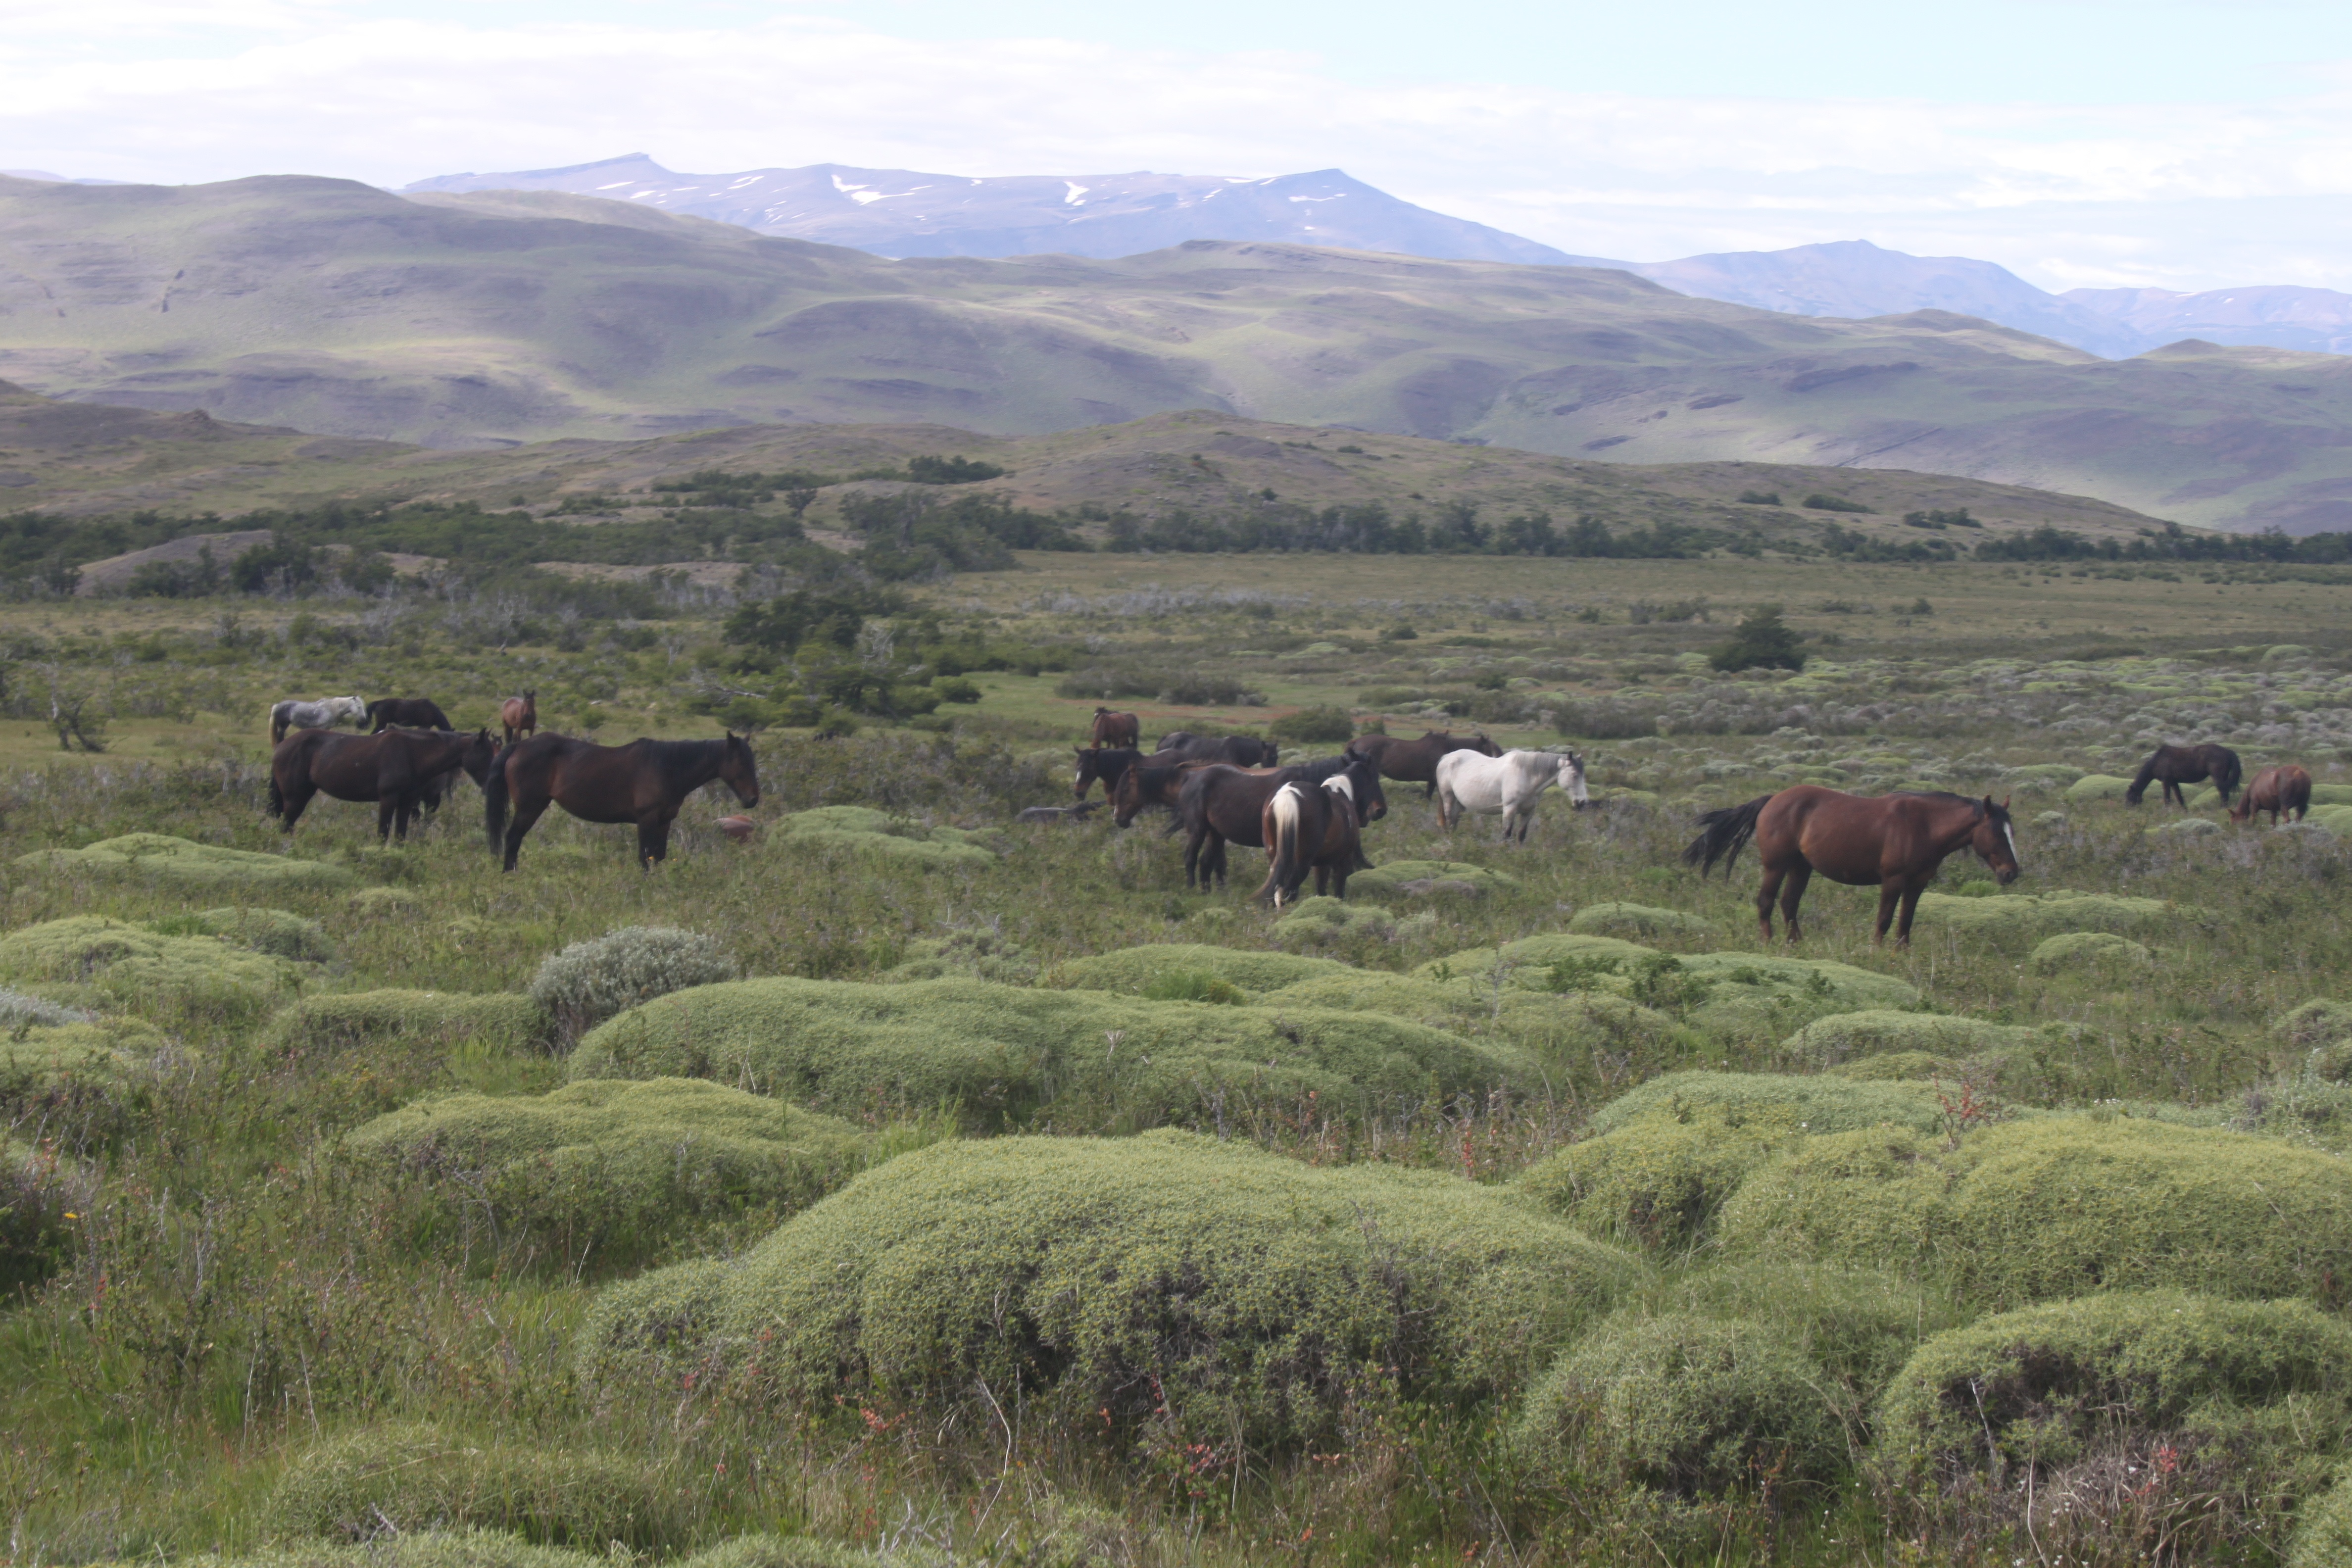 Horses in Chile, photo by Craig Bellamy, Flickr, CC BY-NC-SA 2.0